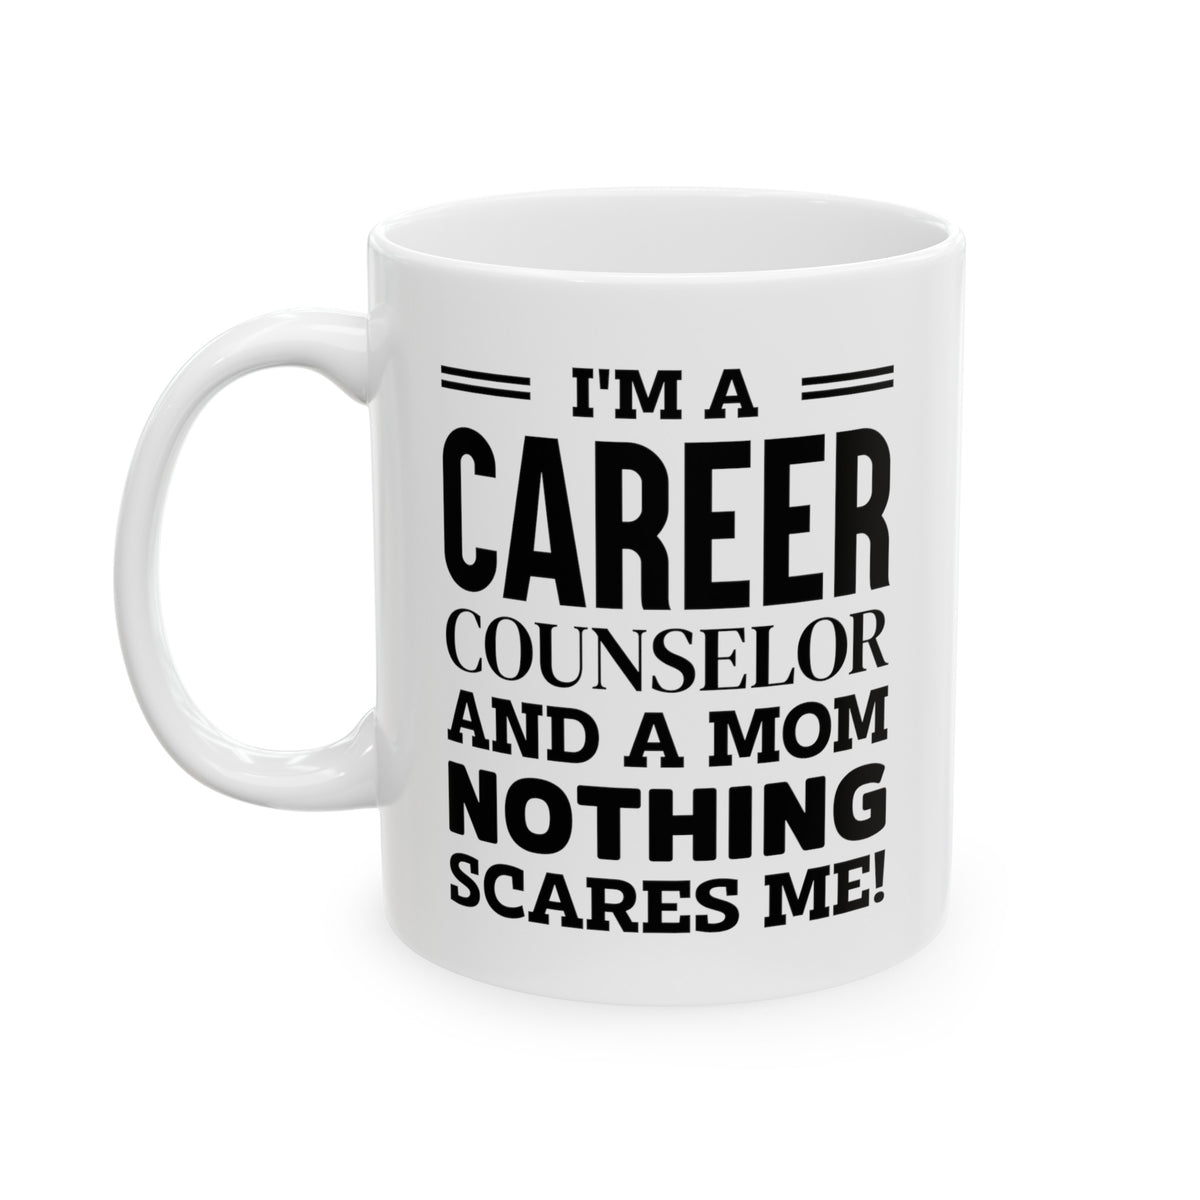 Funny Career counselor Mother's Day 11oz Coffee Mug - I'm a Mom - Unique Inspirational Sarcasm Gift From Son and Daughter